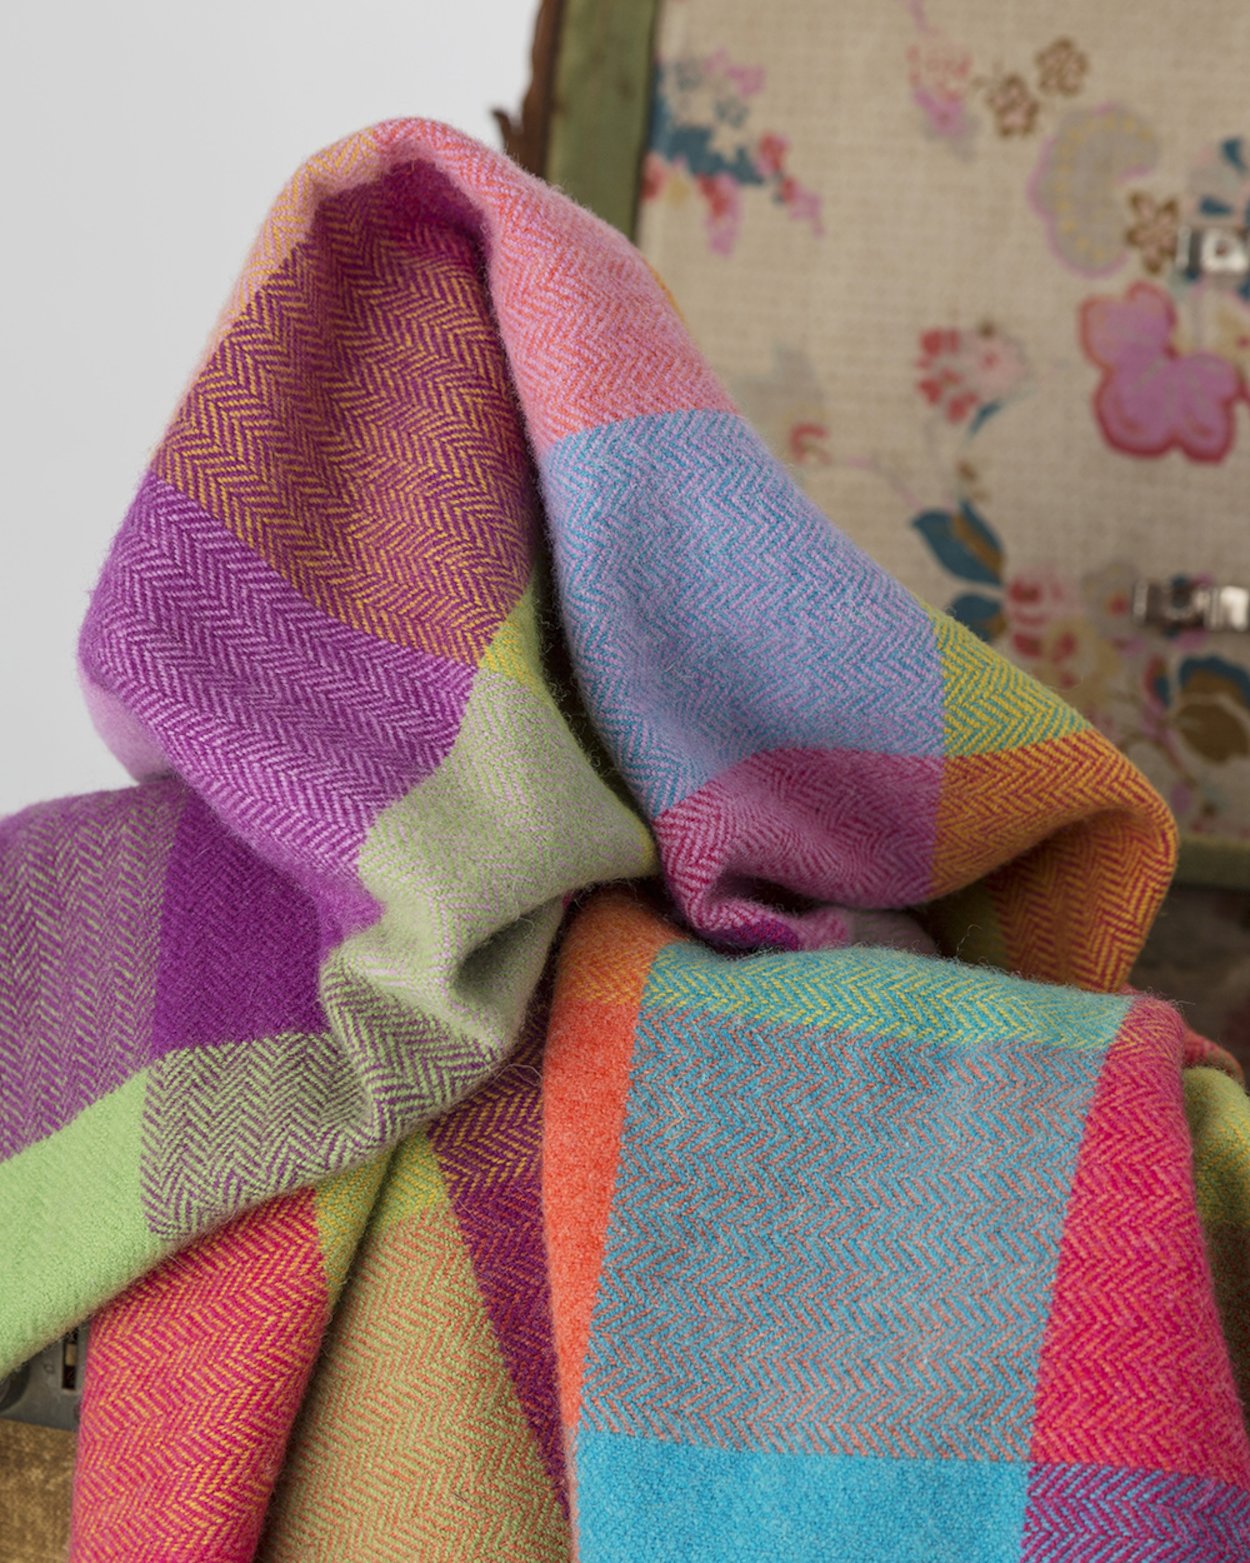 Made in Ireland 100% Pure Wool Throw by Avoca Design: Mahon 